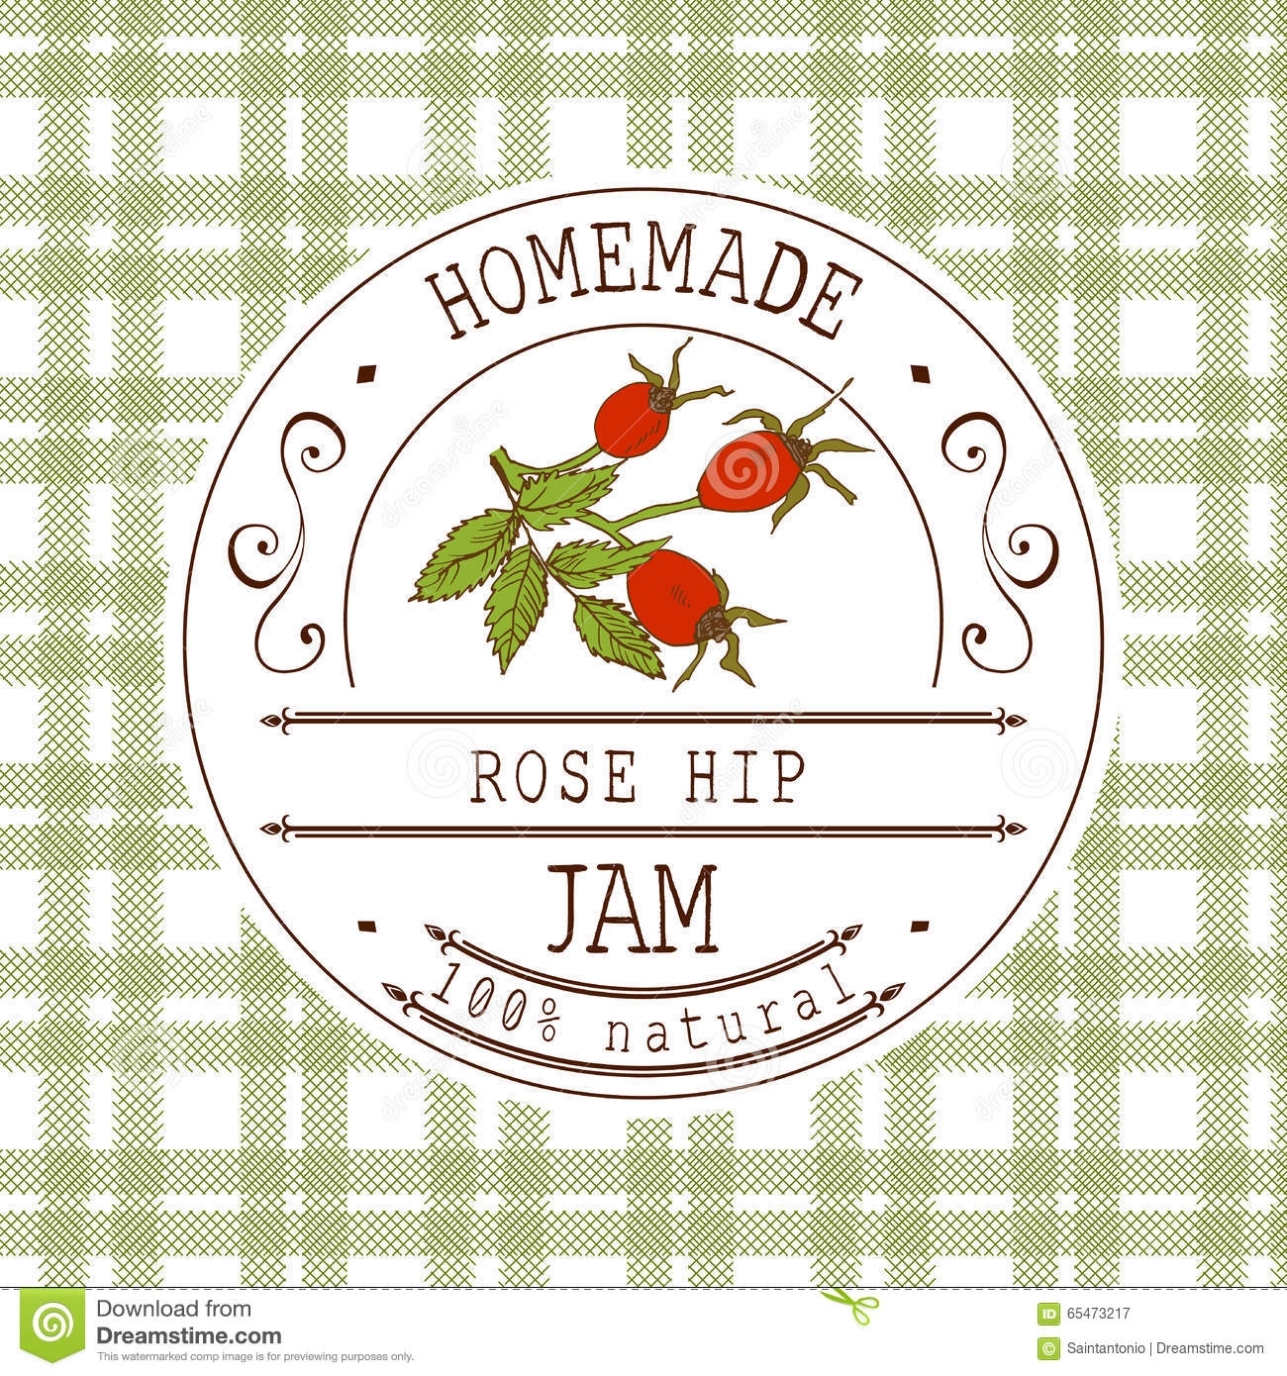 Jam Label Design Template. For Rose Hip Dessert Product With Hand Drawn Pertaining To Dessert Labels Template